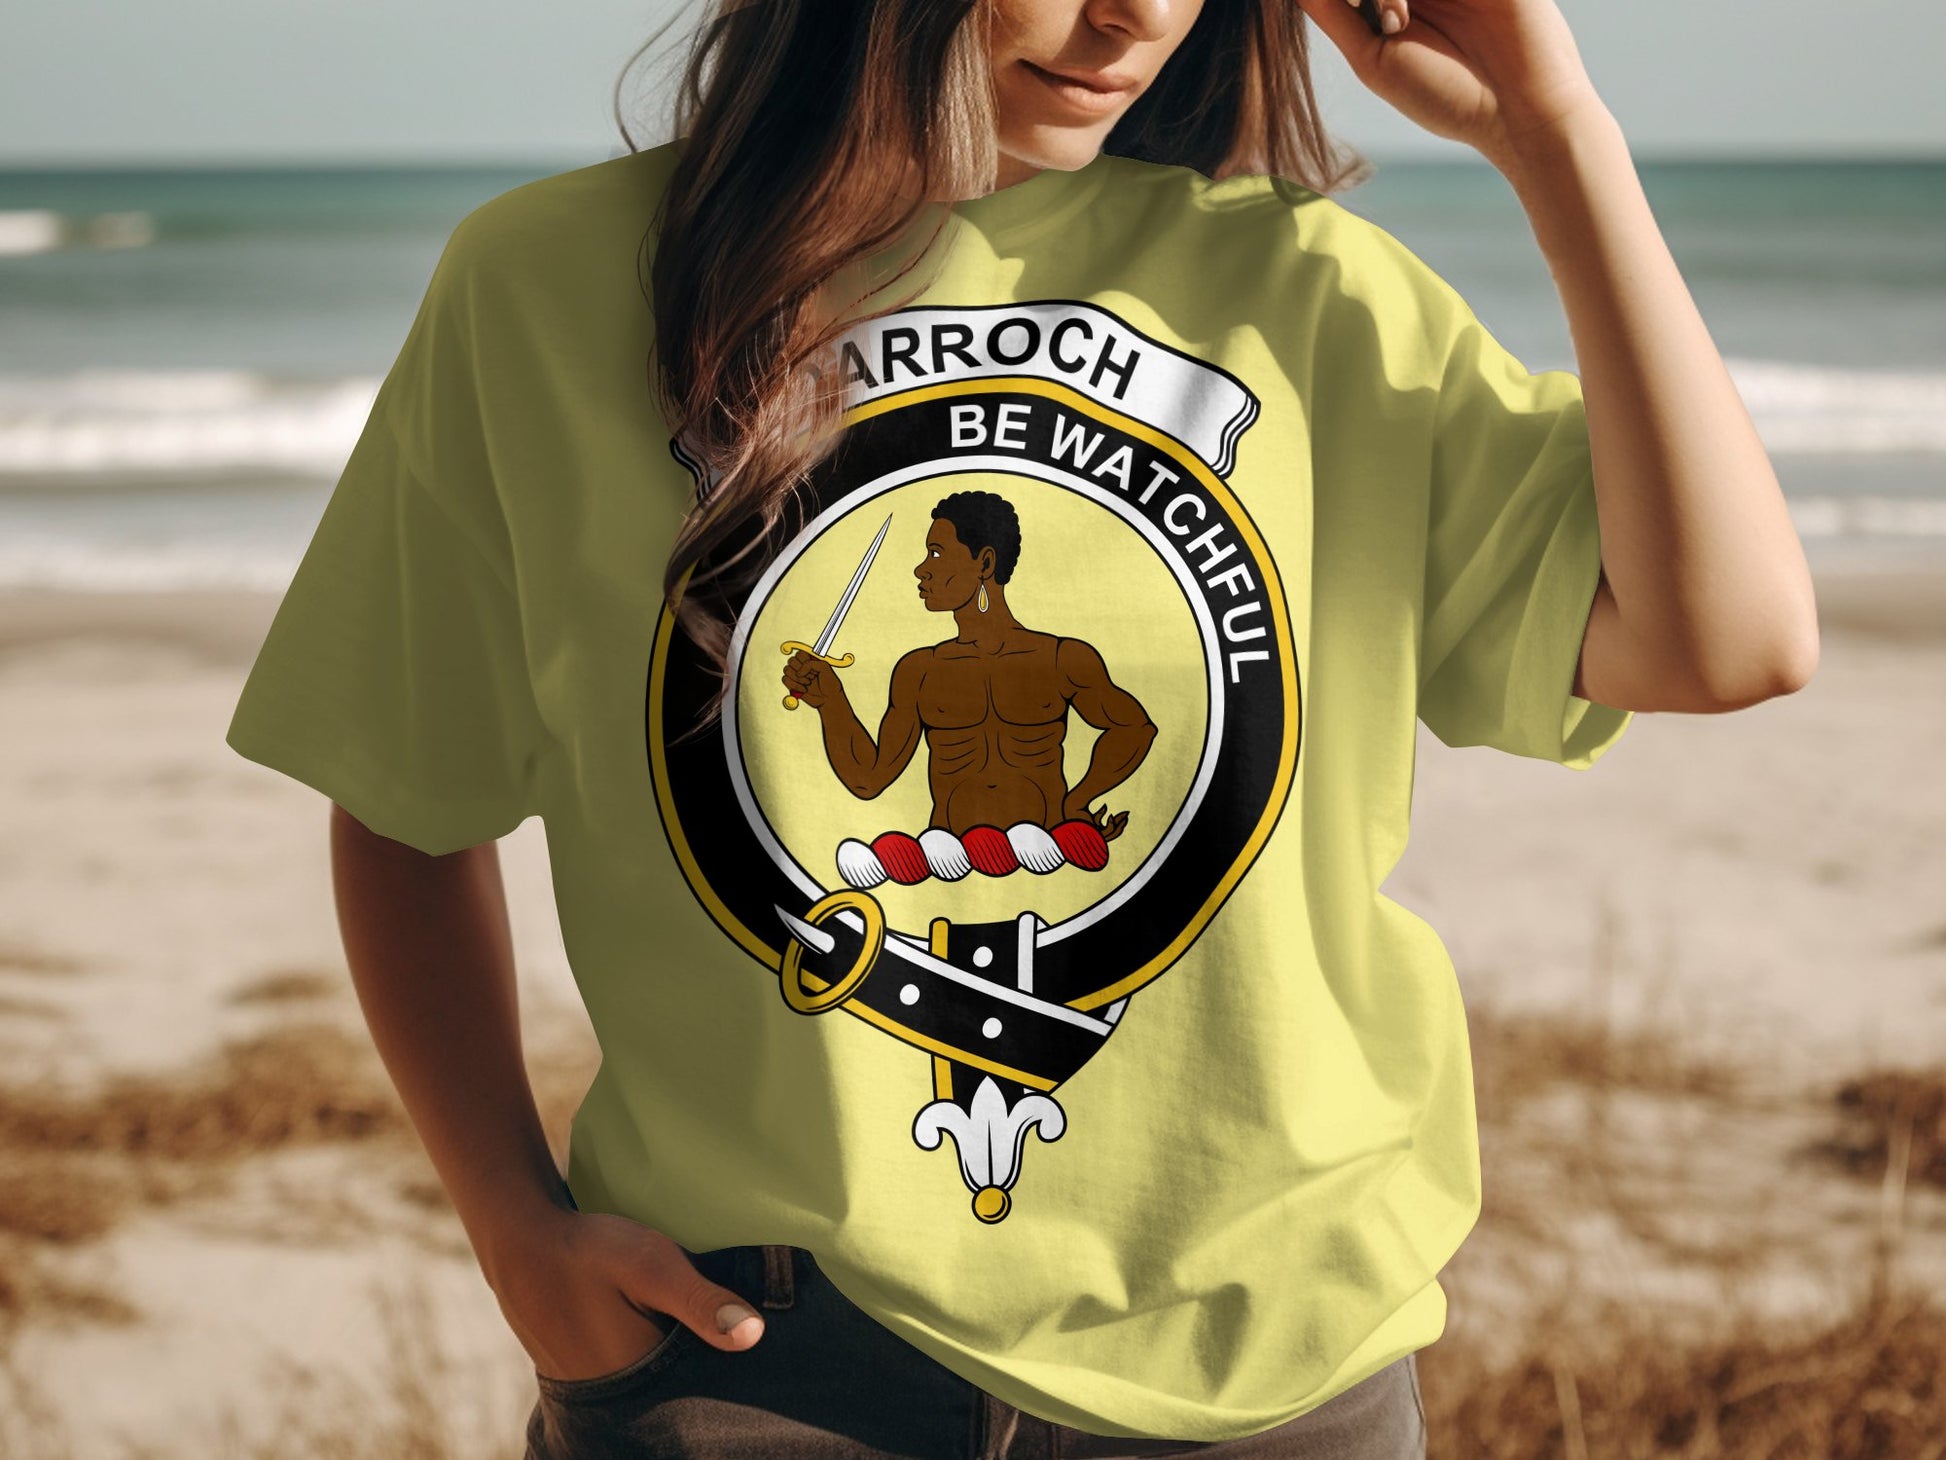 Darroch Scottish Clan Crest T-Shirt for Highland Games - Living Stone Gifts